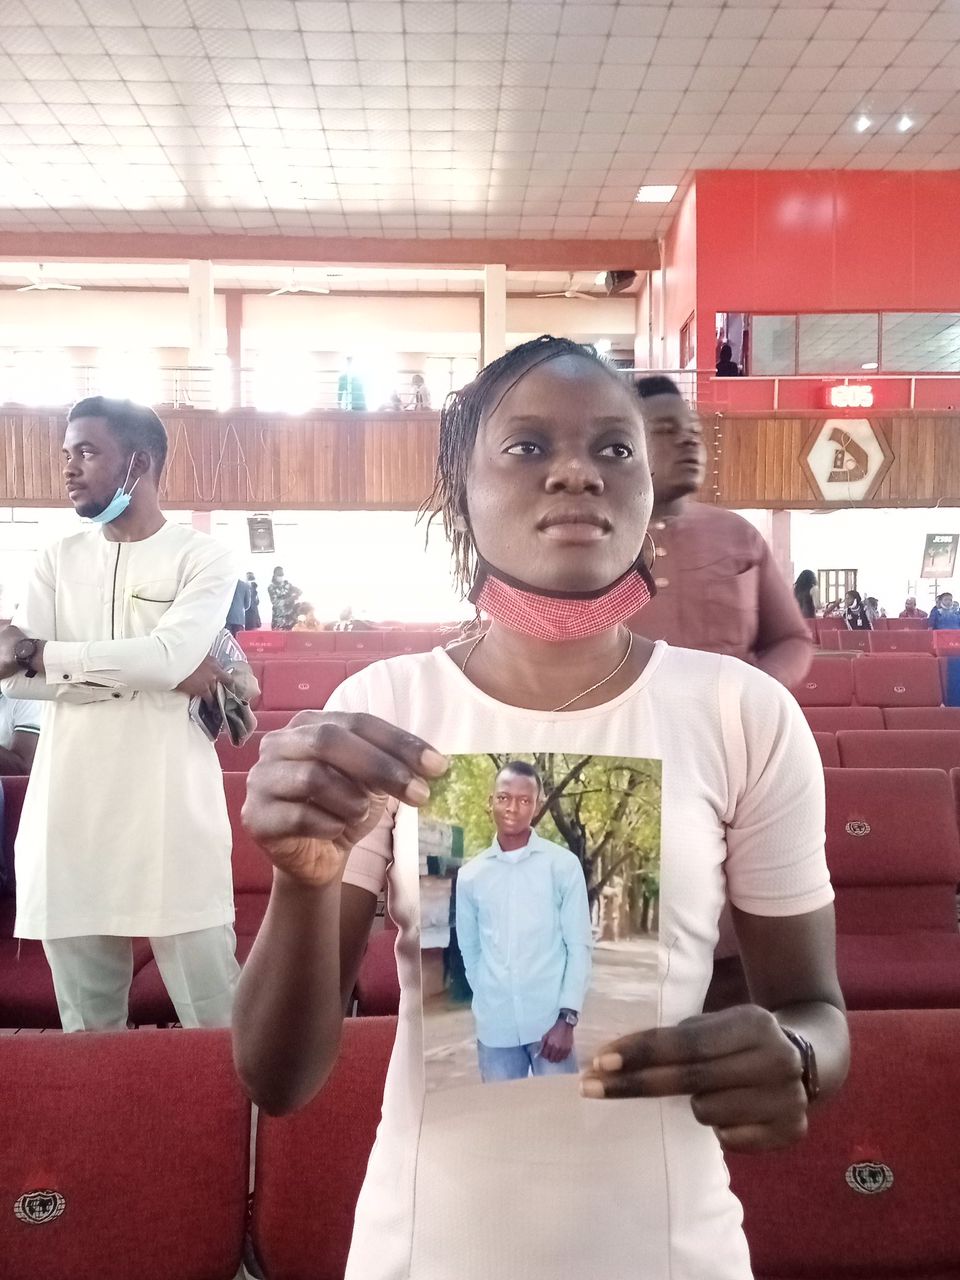 Man cries out as lady takes his picture to church after 'mistakenly' promising her marriage